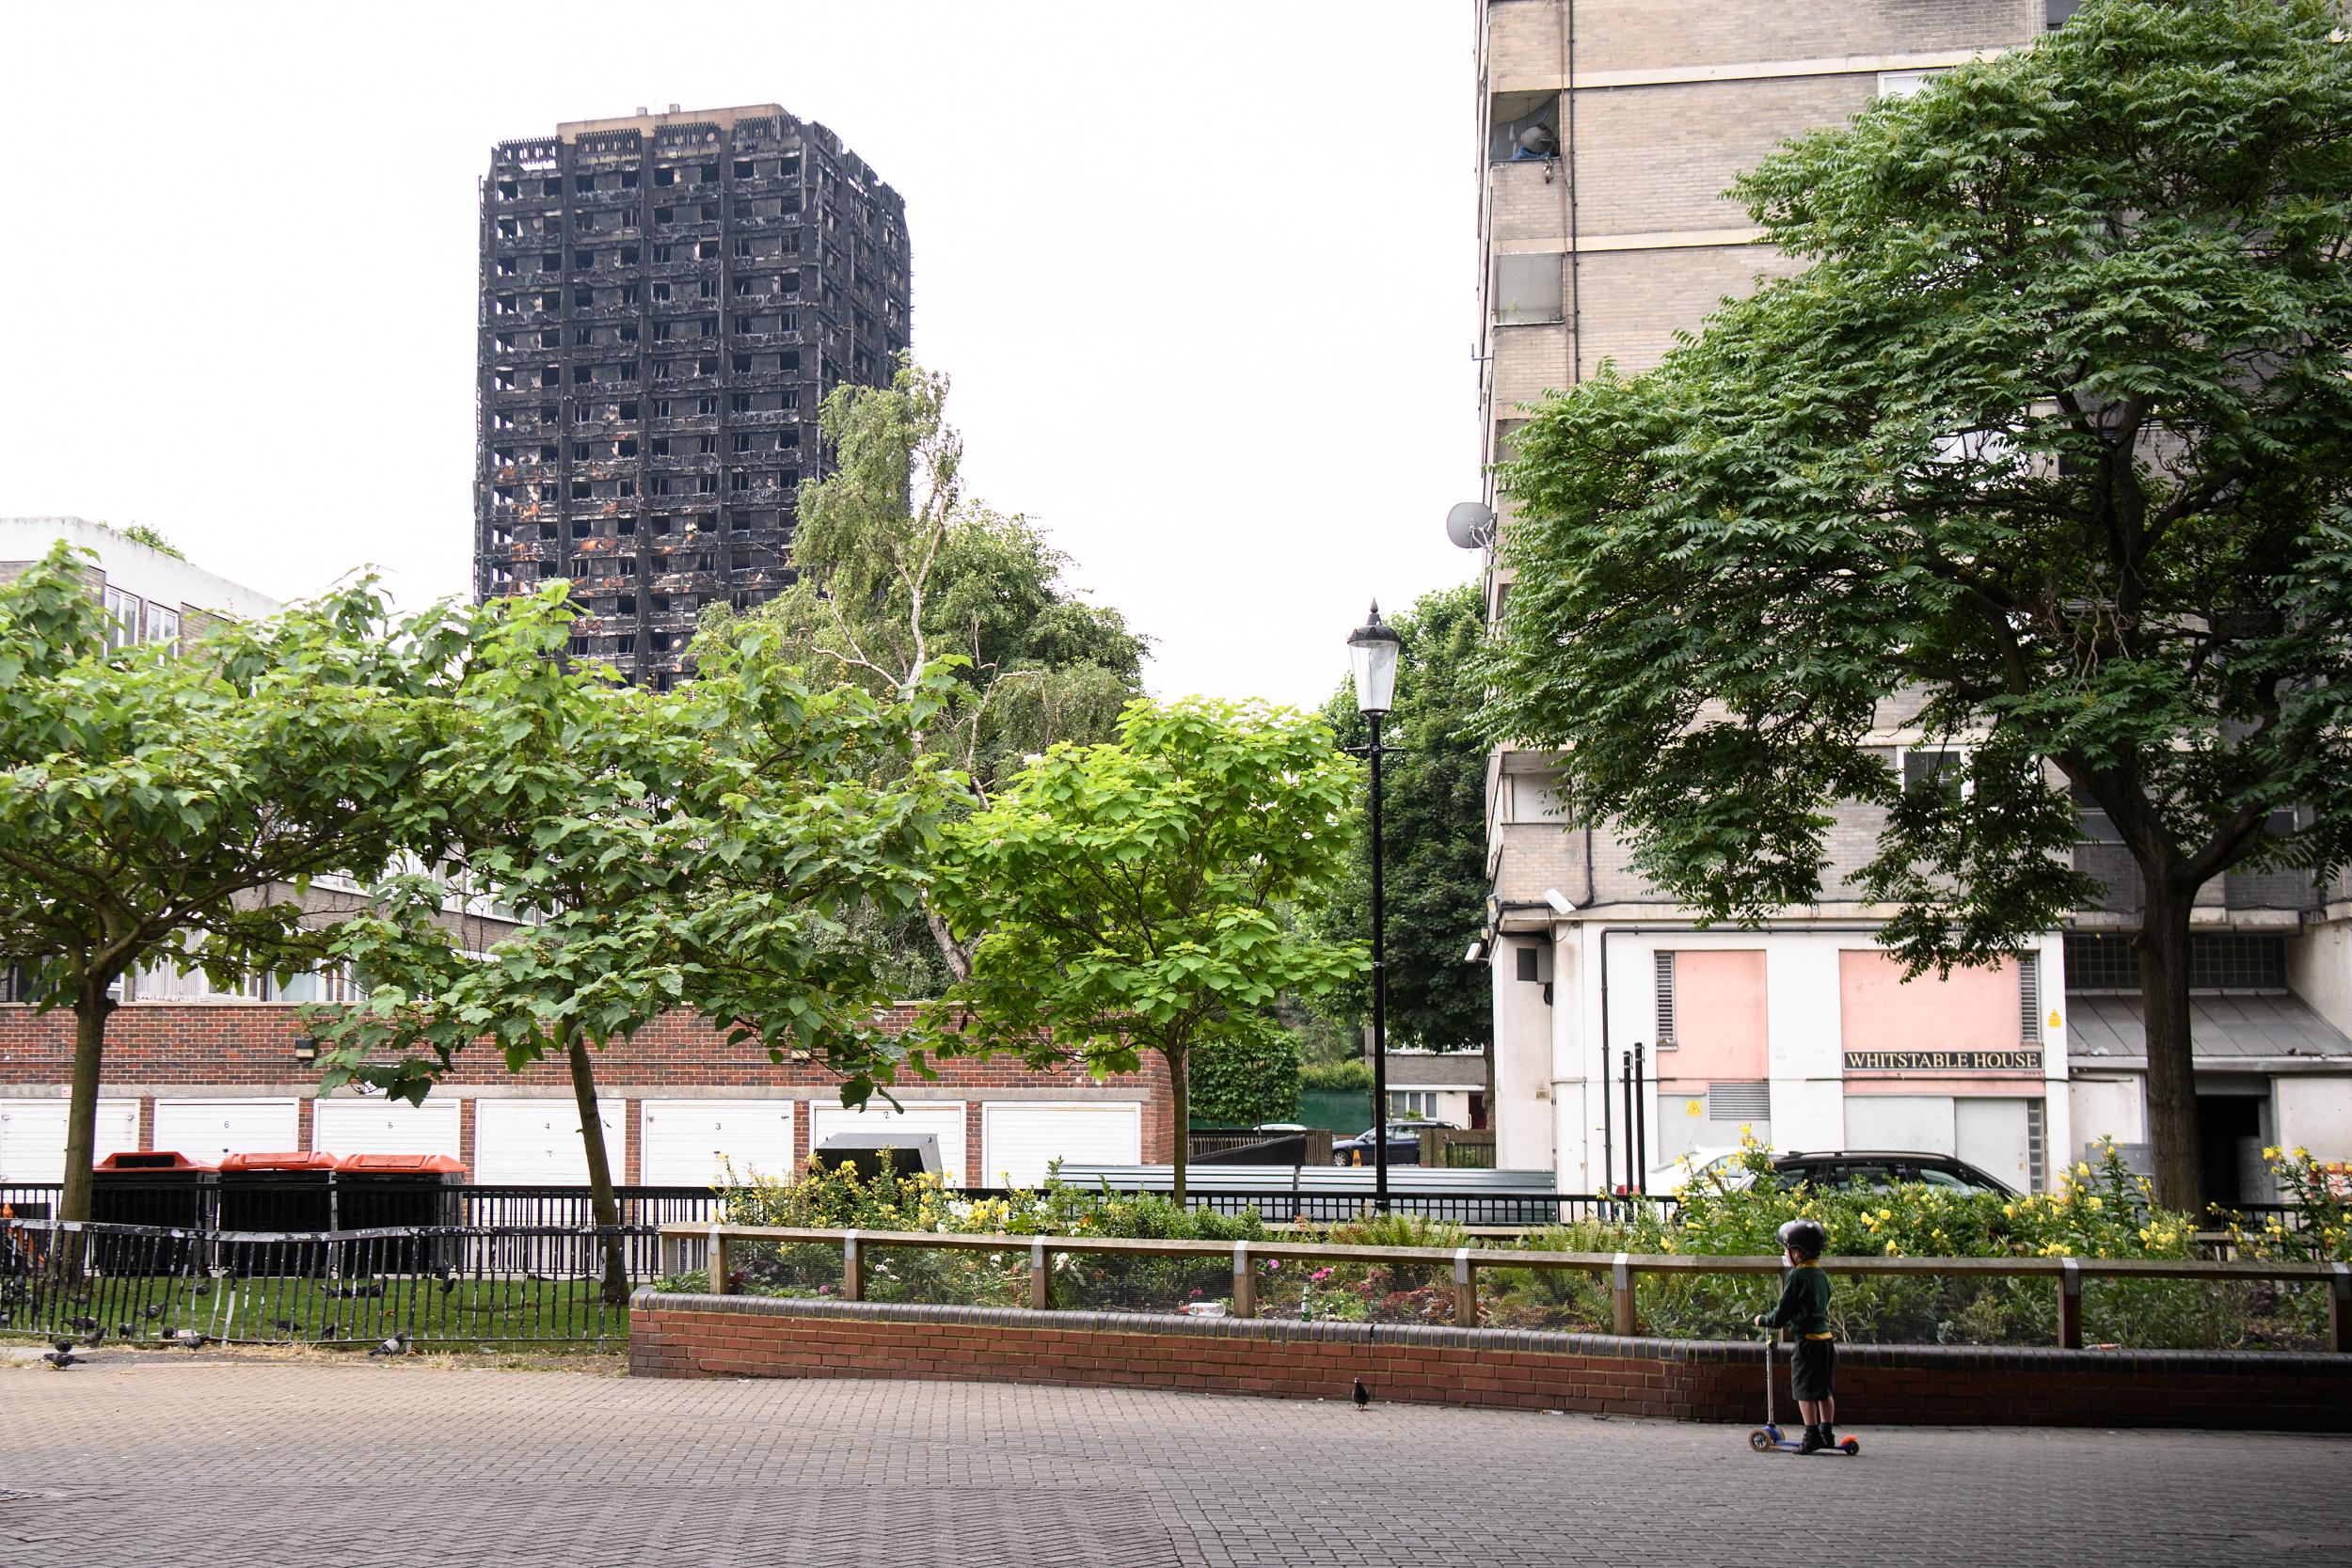 Tests have been conducted on 600 high-rise buildings after the blaze ripped through the 24-storey building in Kensington